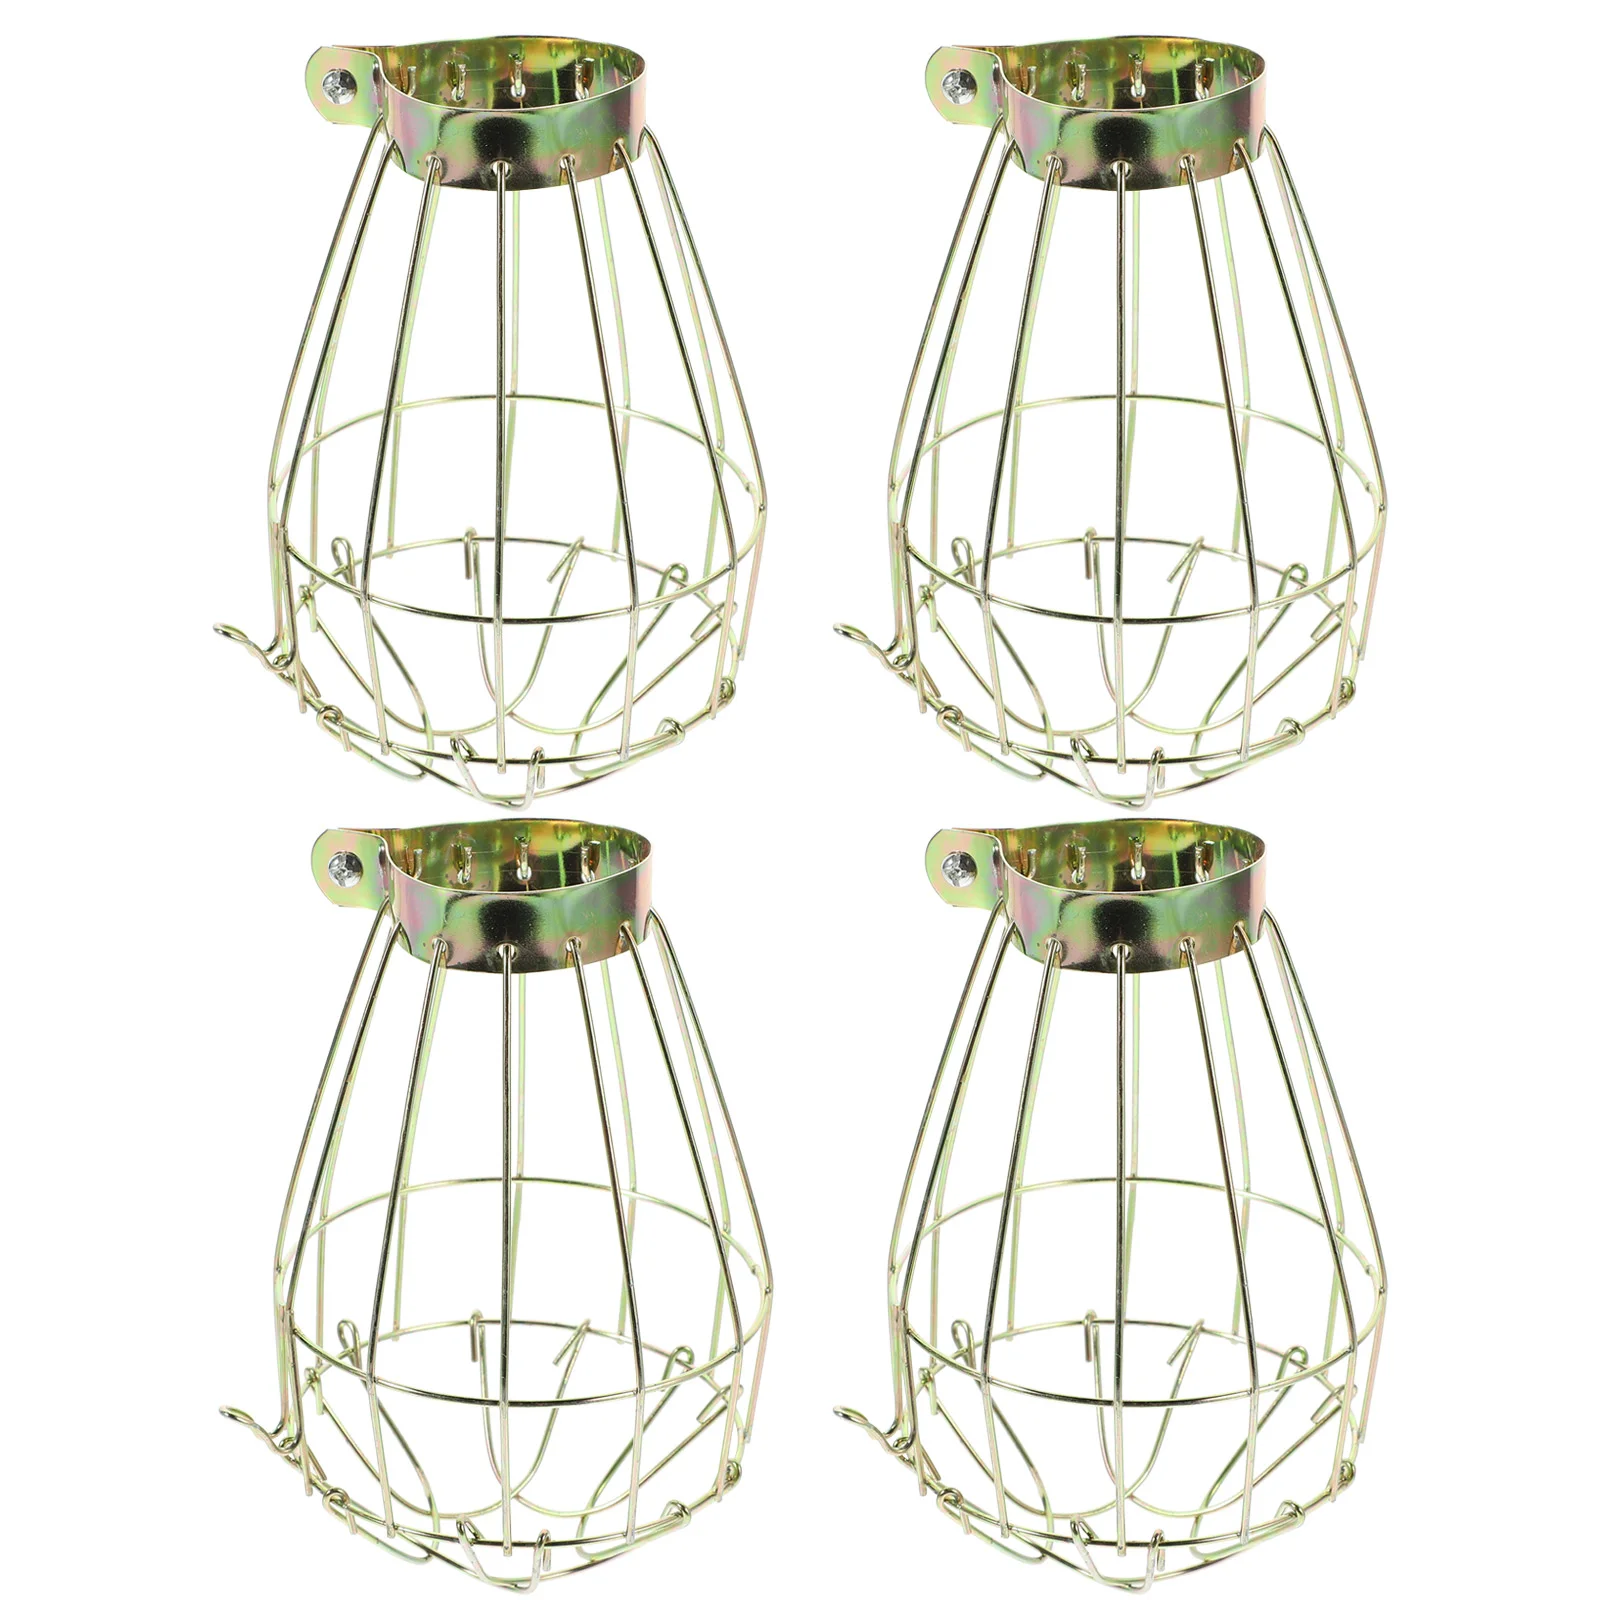 

6pcs Metal Cage Lamp Shade Industrial Bulb Shade Farmhouse Bulb Cage Guard Hanging Pendant Light Cover for Home Office Bedroom